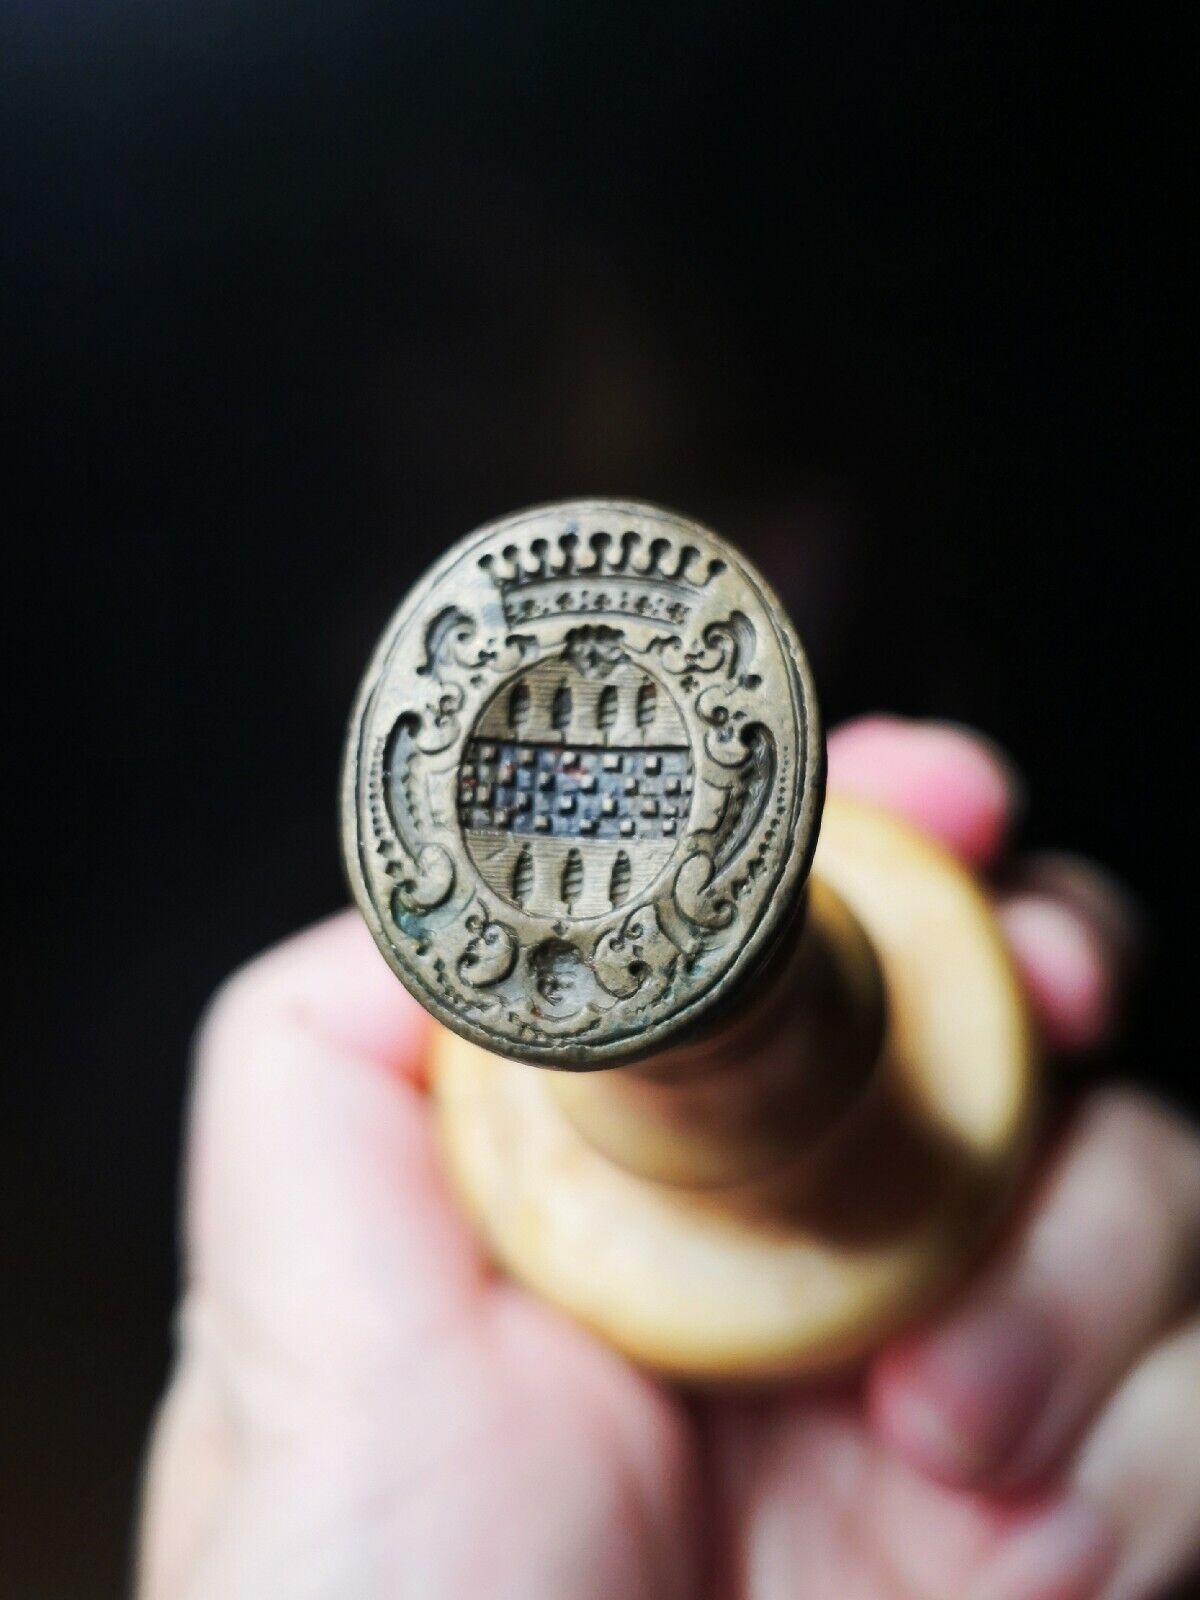 Antique France Count's Crown Coat of Arms Wax Seal/Desk Stamp. 18th C.